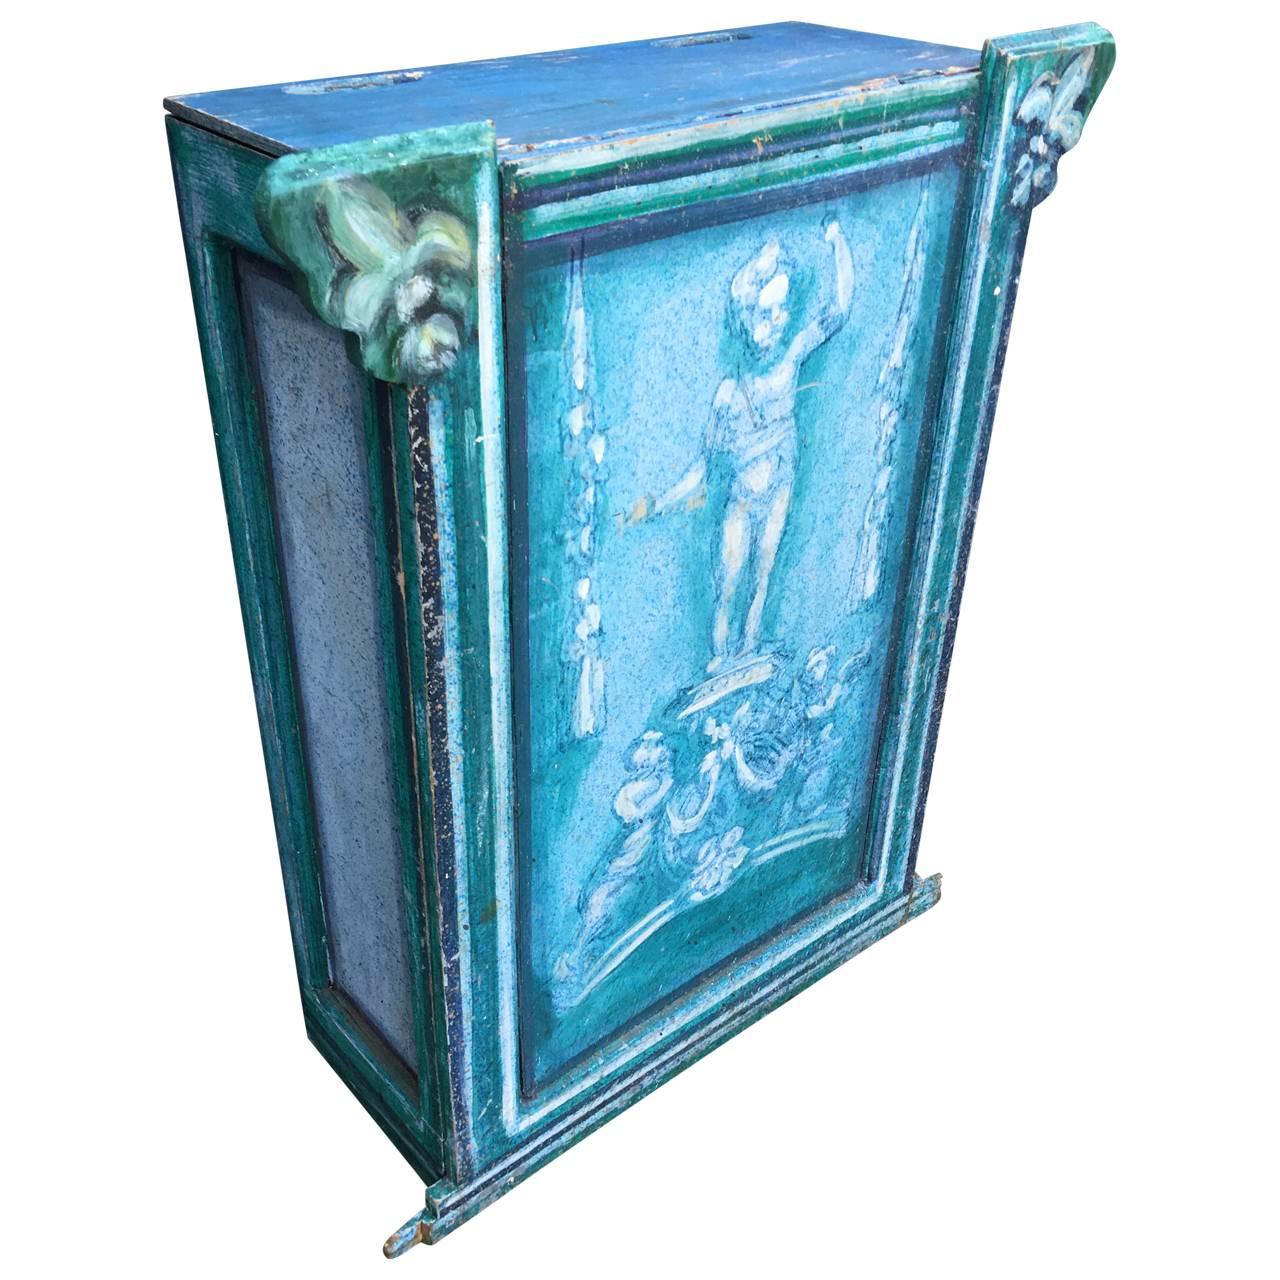 Foldable wooden radiator screen with blue, painted centerpiece with standing putti.